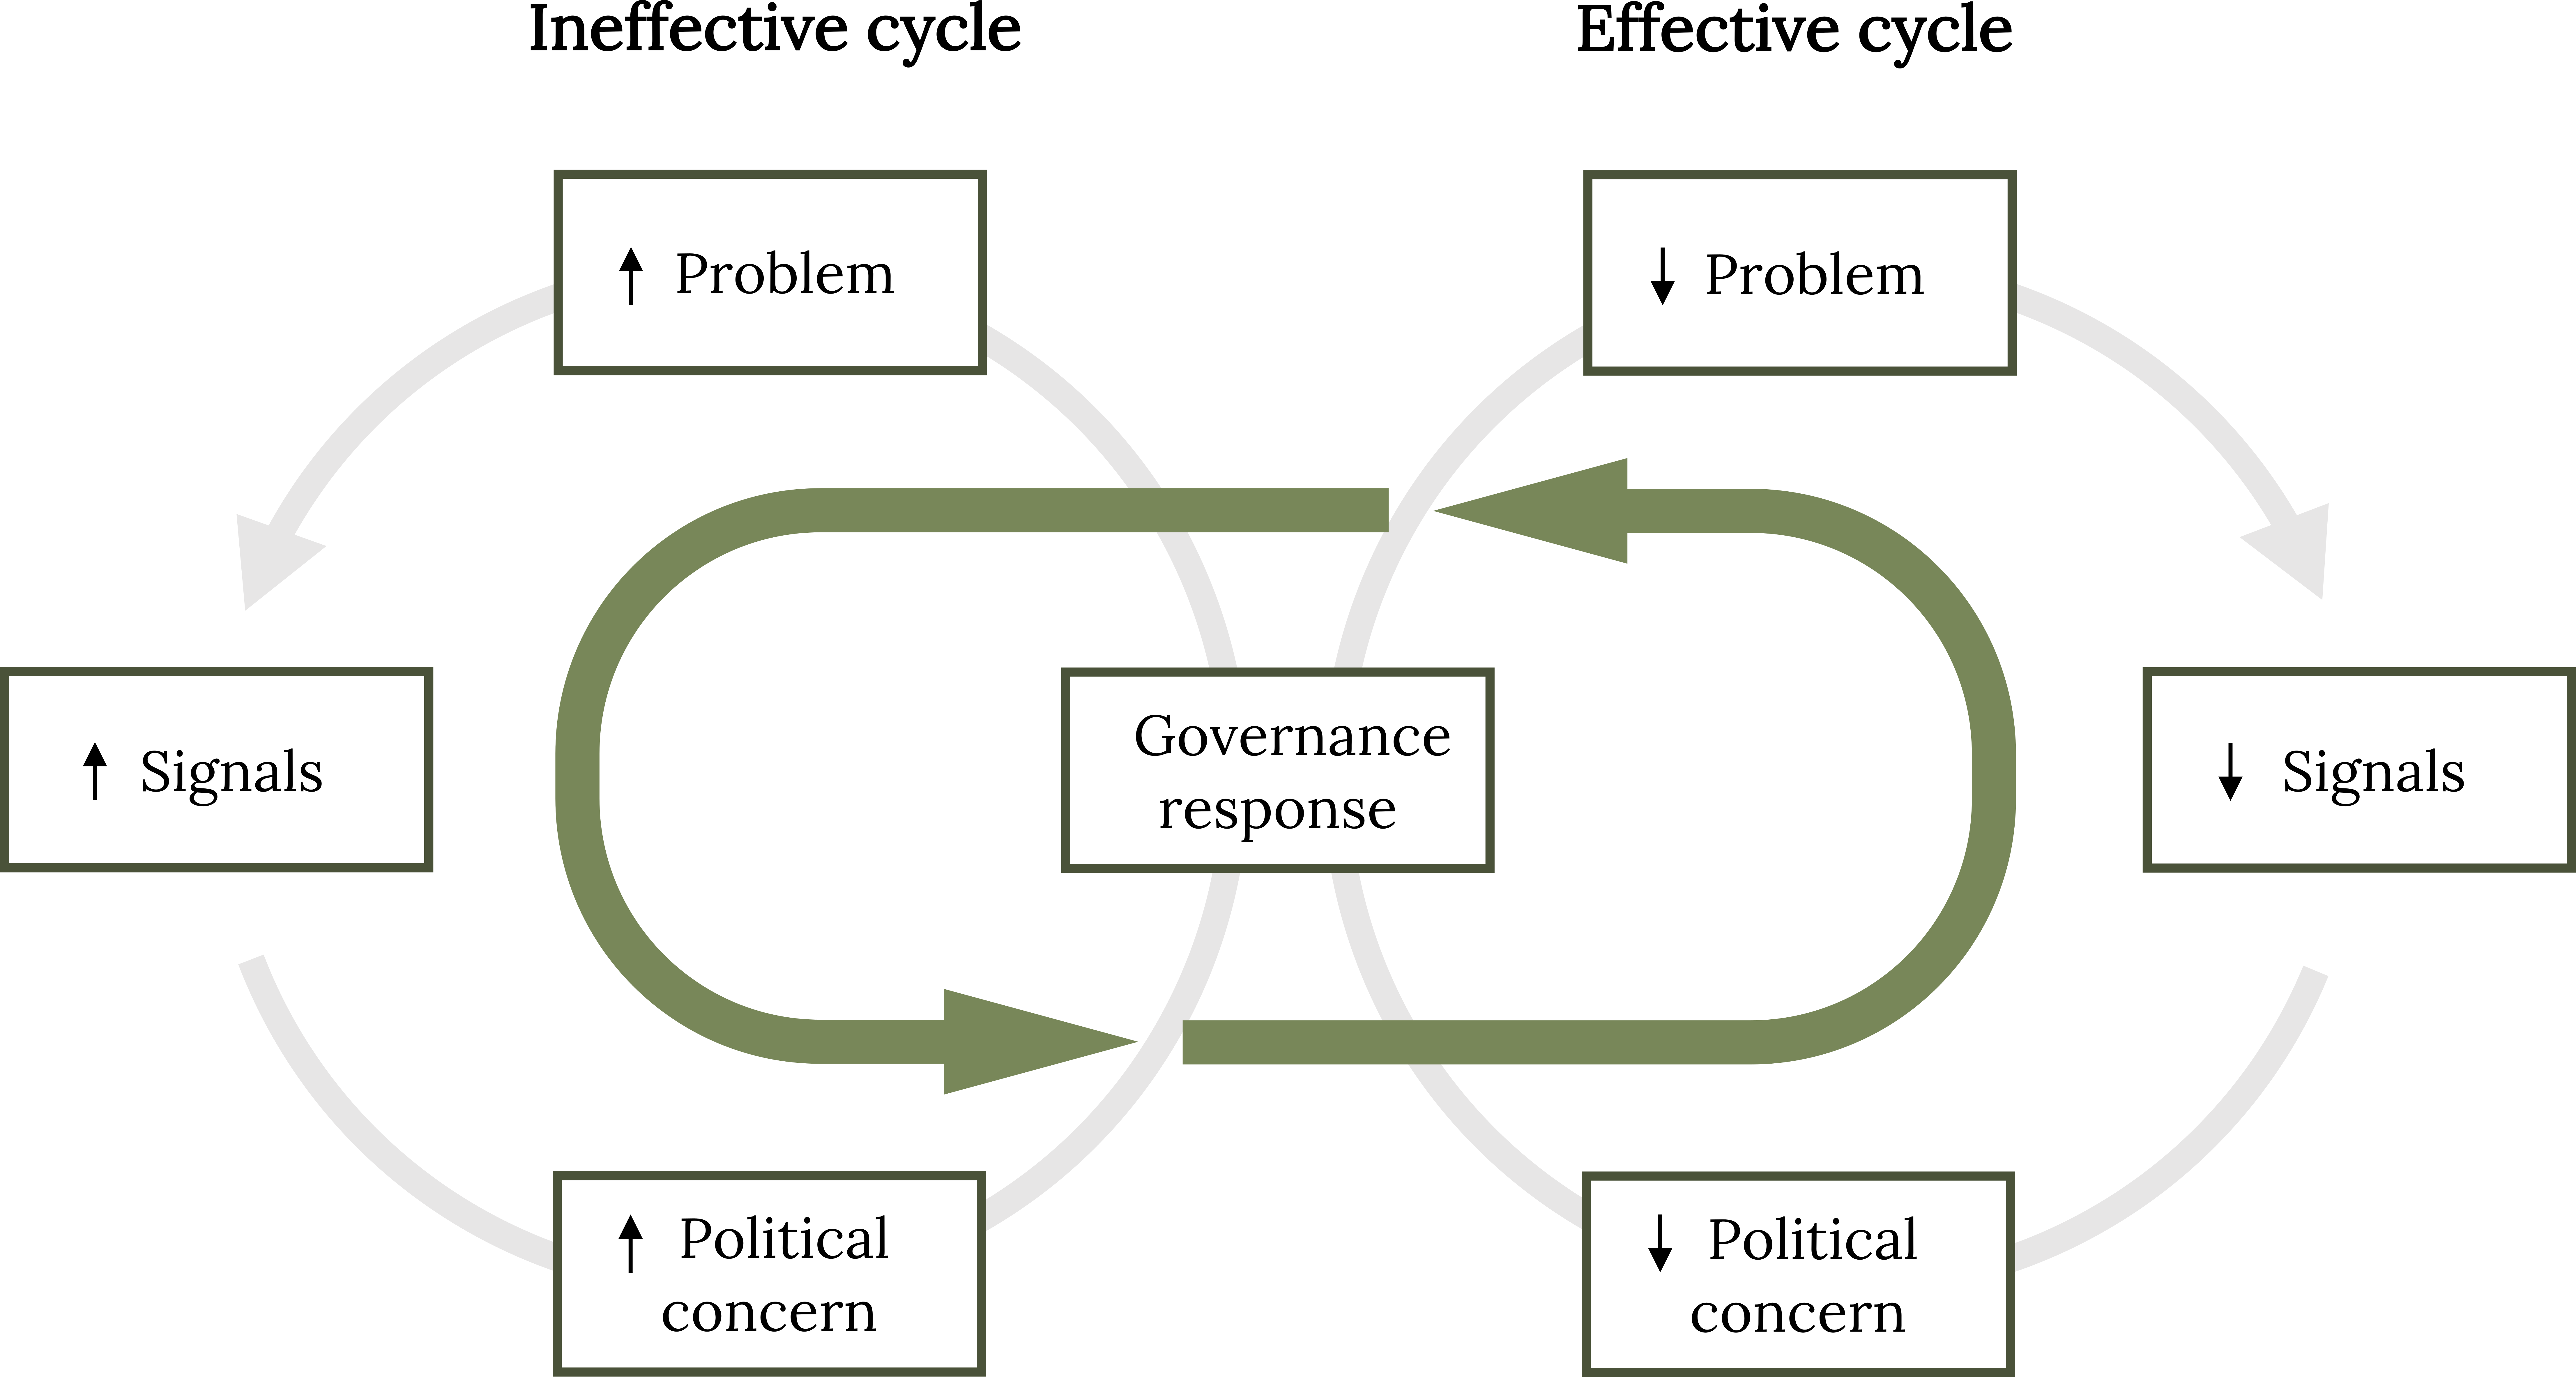 Ineffective and effective governance cycles